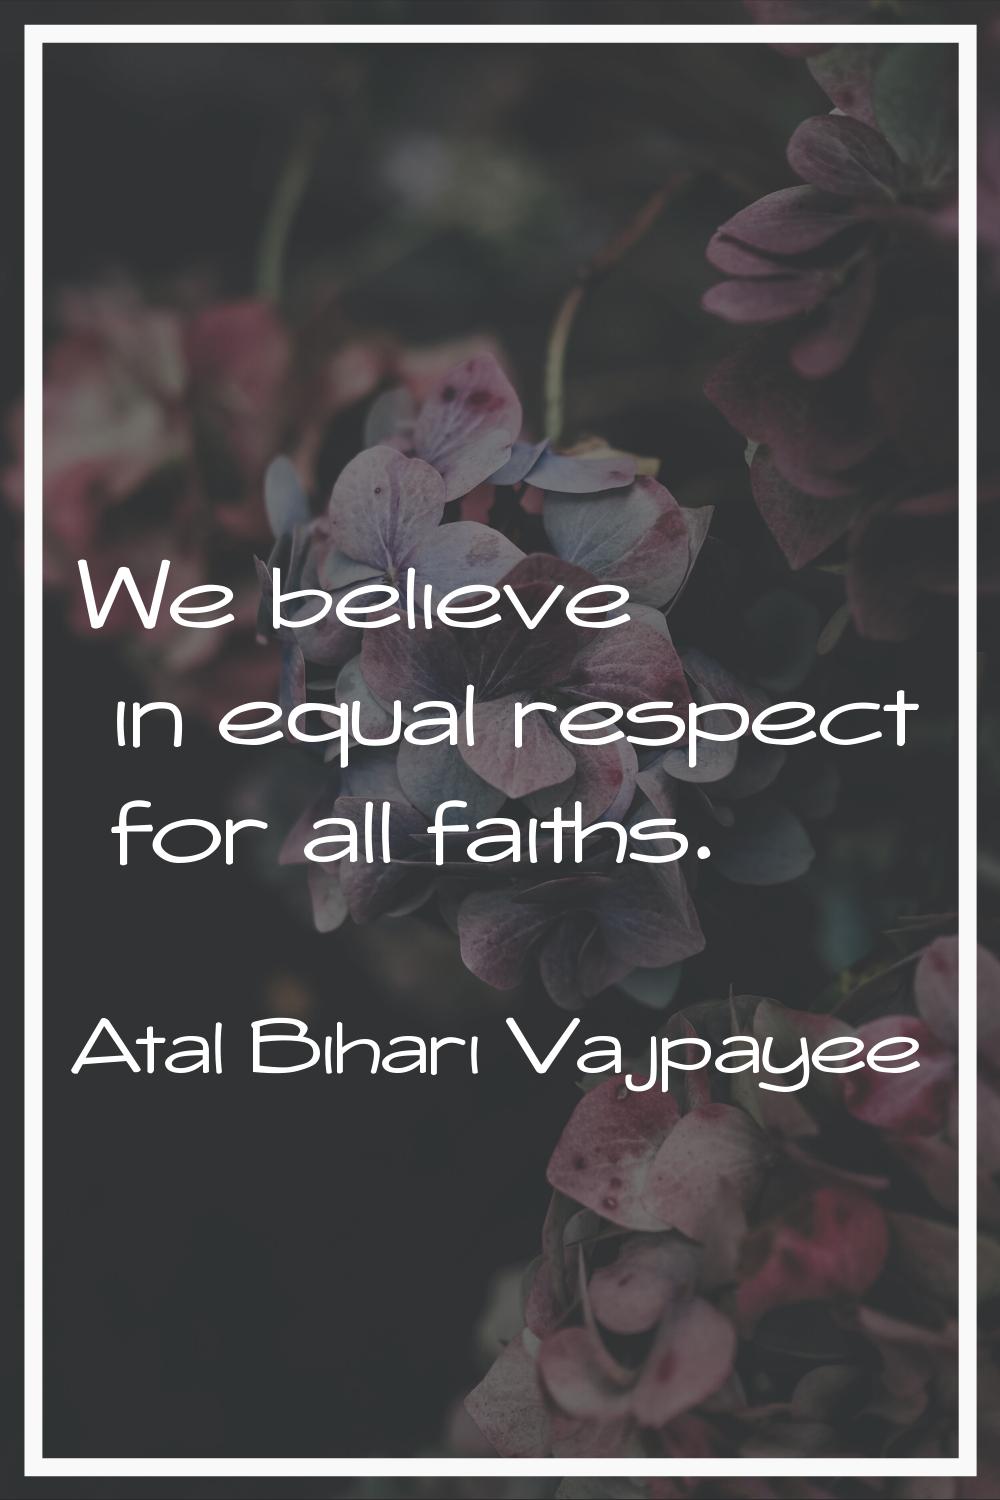 We believe in equal respect for all faiths.